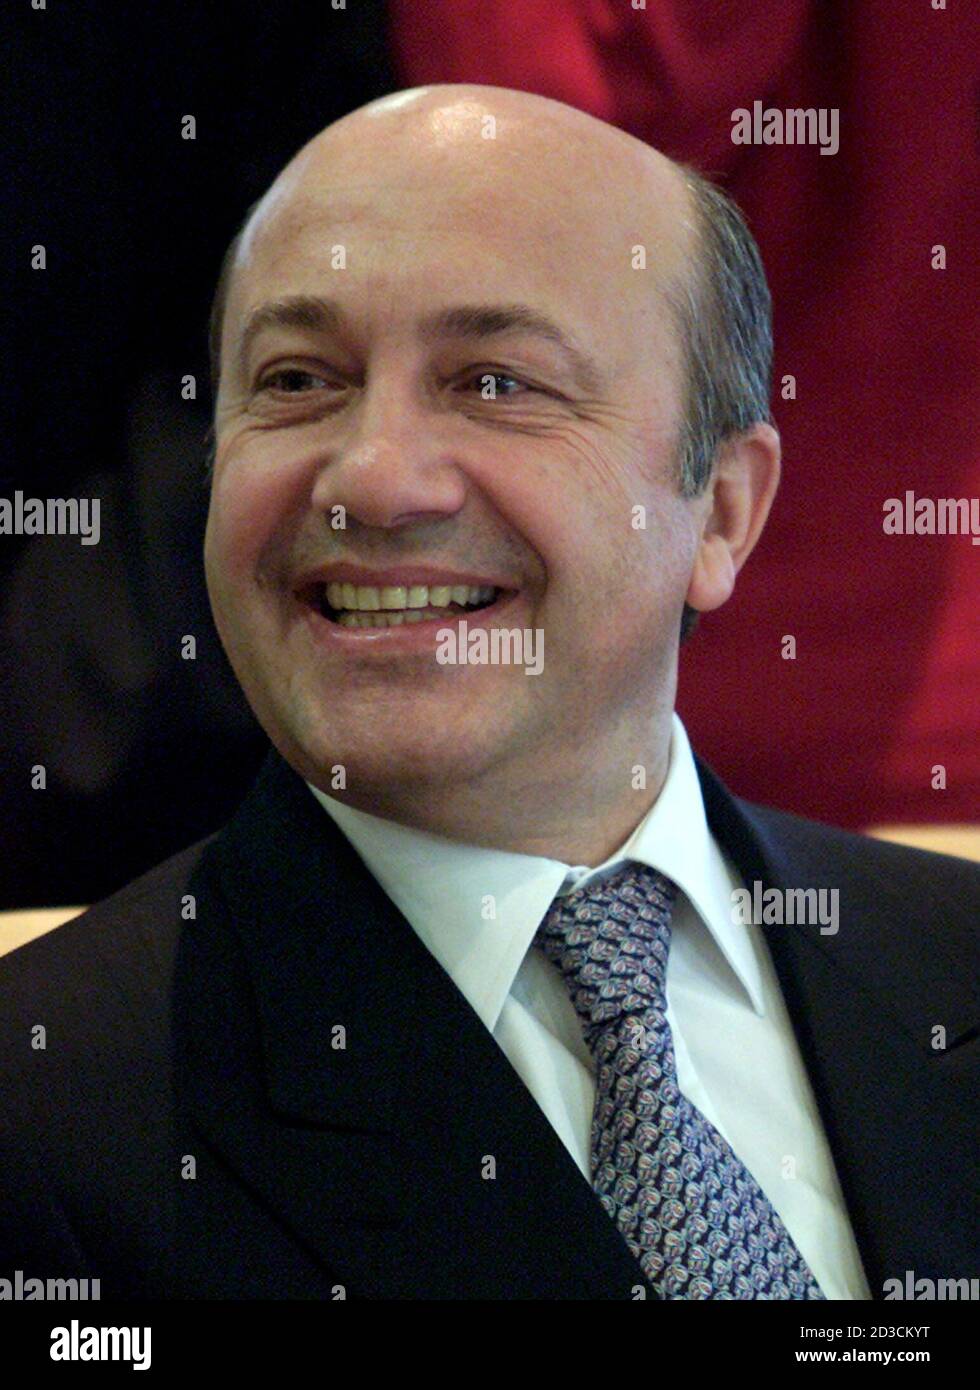 Russian Foreign Minister Igor Ivanov smiles during a meeting with Greek Foreign Minister George Ppanderou (not pictured) in Athens January 24, 2003. Ivanov told reporters in Athens: ' There is no serious reason for the start of a military attack on Iraq. We hope that no country will take single action outside U.N. decisions'. REUTERS/Yiorgos Karahalis REUTERS  YK Stock Photo